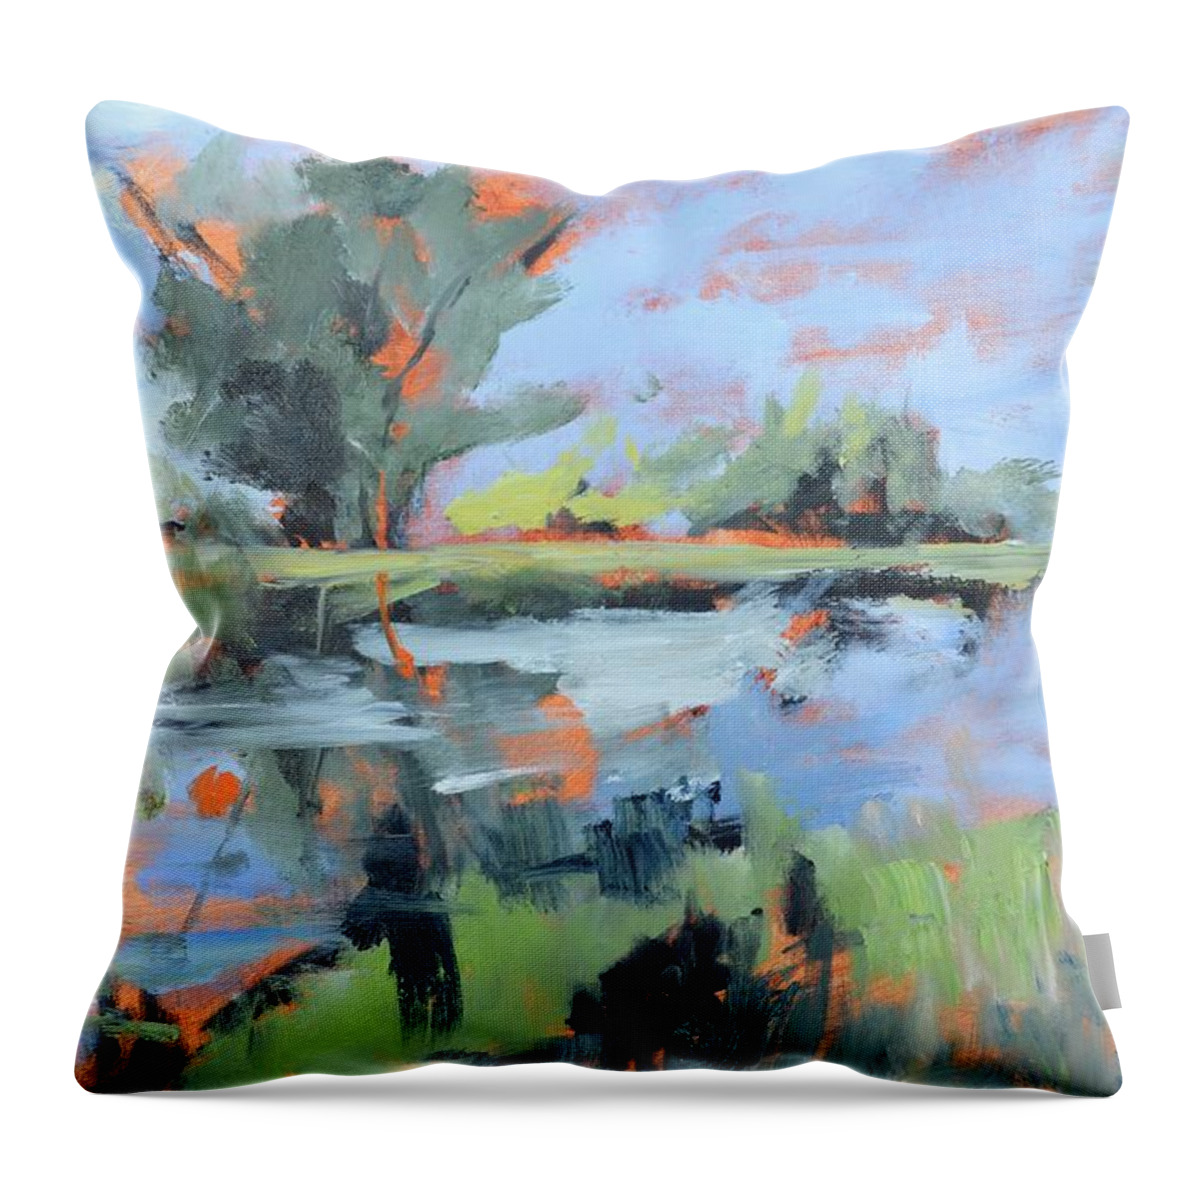 Abstract Landscape Throw Pillow featuring the painting Along the River by Donna Tuten